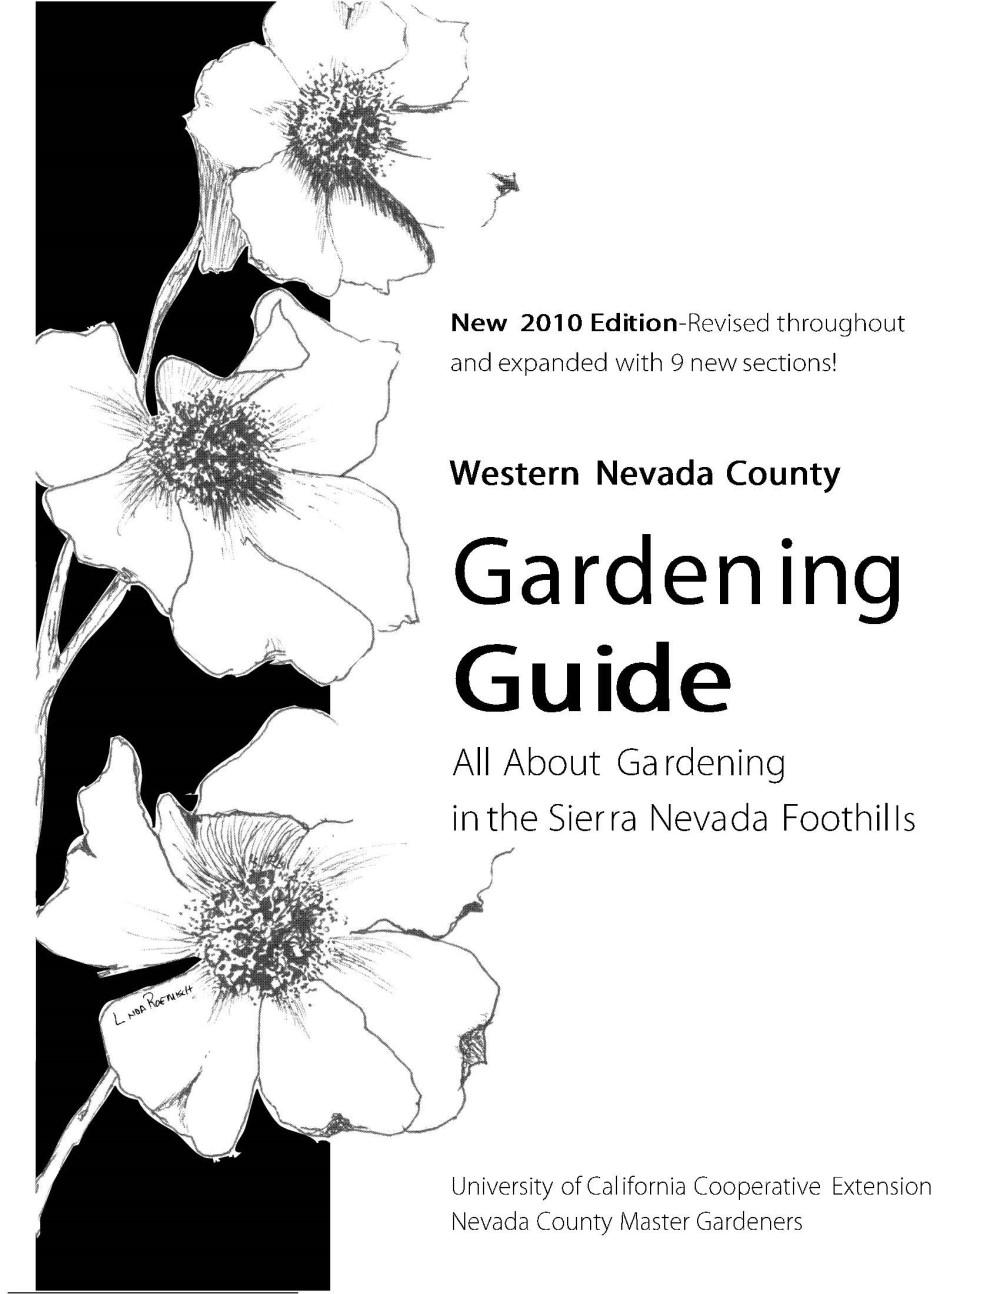 NEVADA COUNTY GARDENING GUIDE As more and more people plant gardens and tend to their landscapes, the Master Gardener program must continually strive to meet the growing demand for gardening